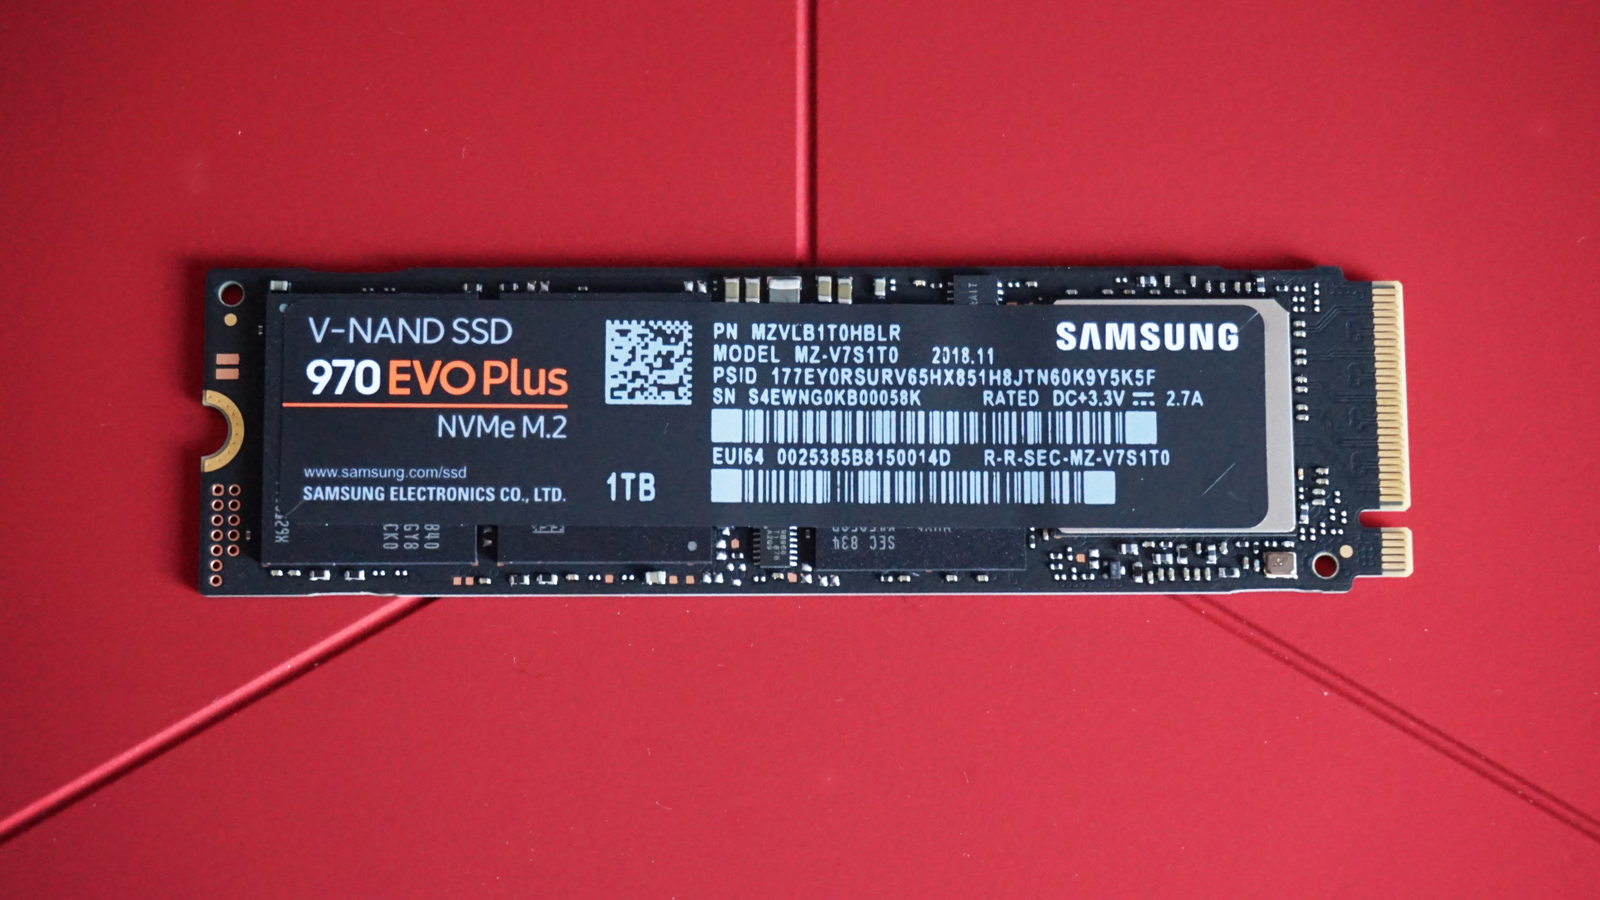 Samsung 970 Evo NVMe SSD Reviews, Pros and Cons